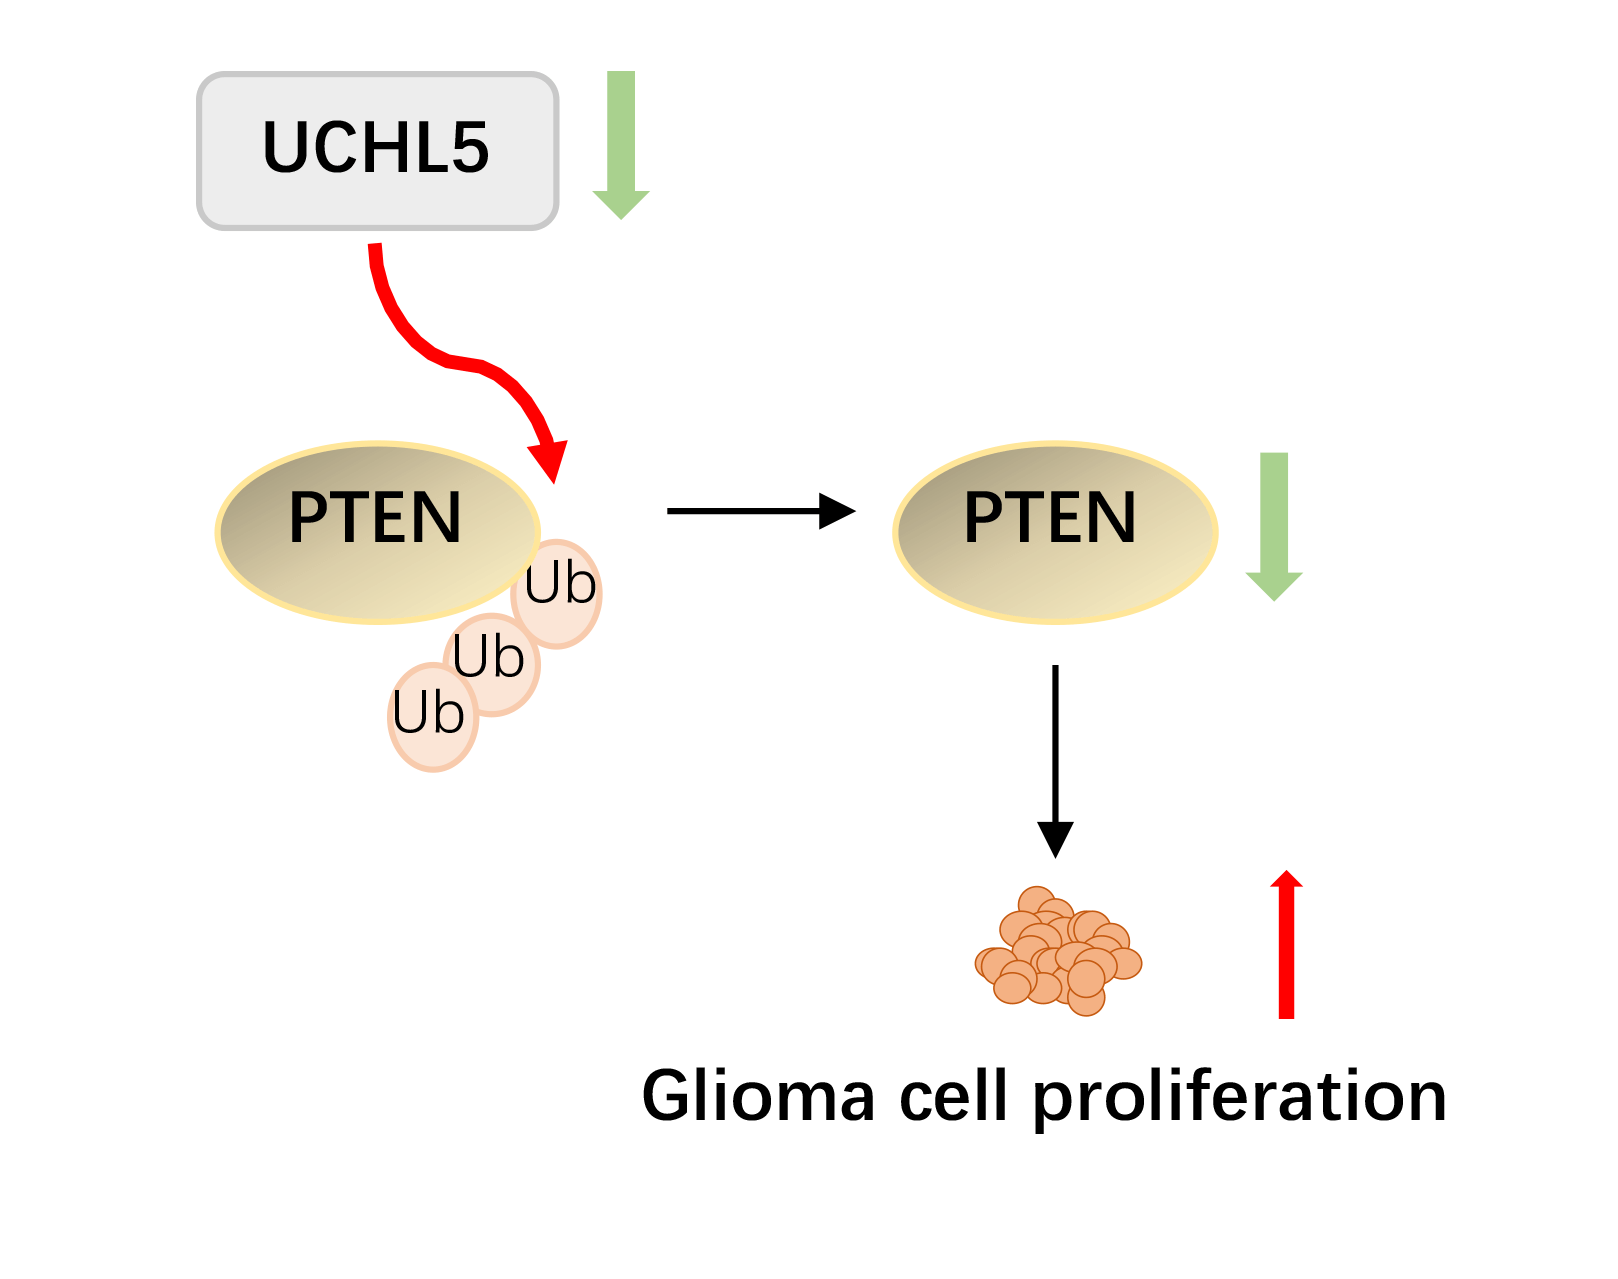 UCHL5 inhibits U251 glioma cell proliferation and tumor growth via stabilizing and deubiquitinating PTEN